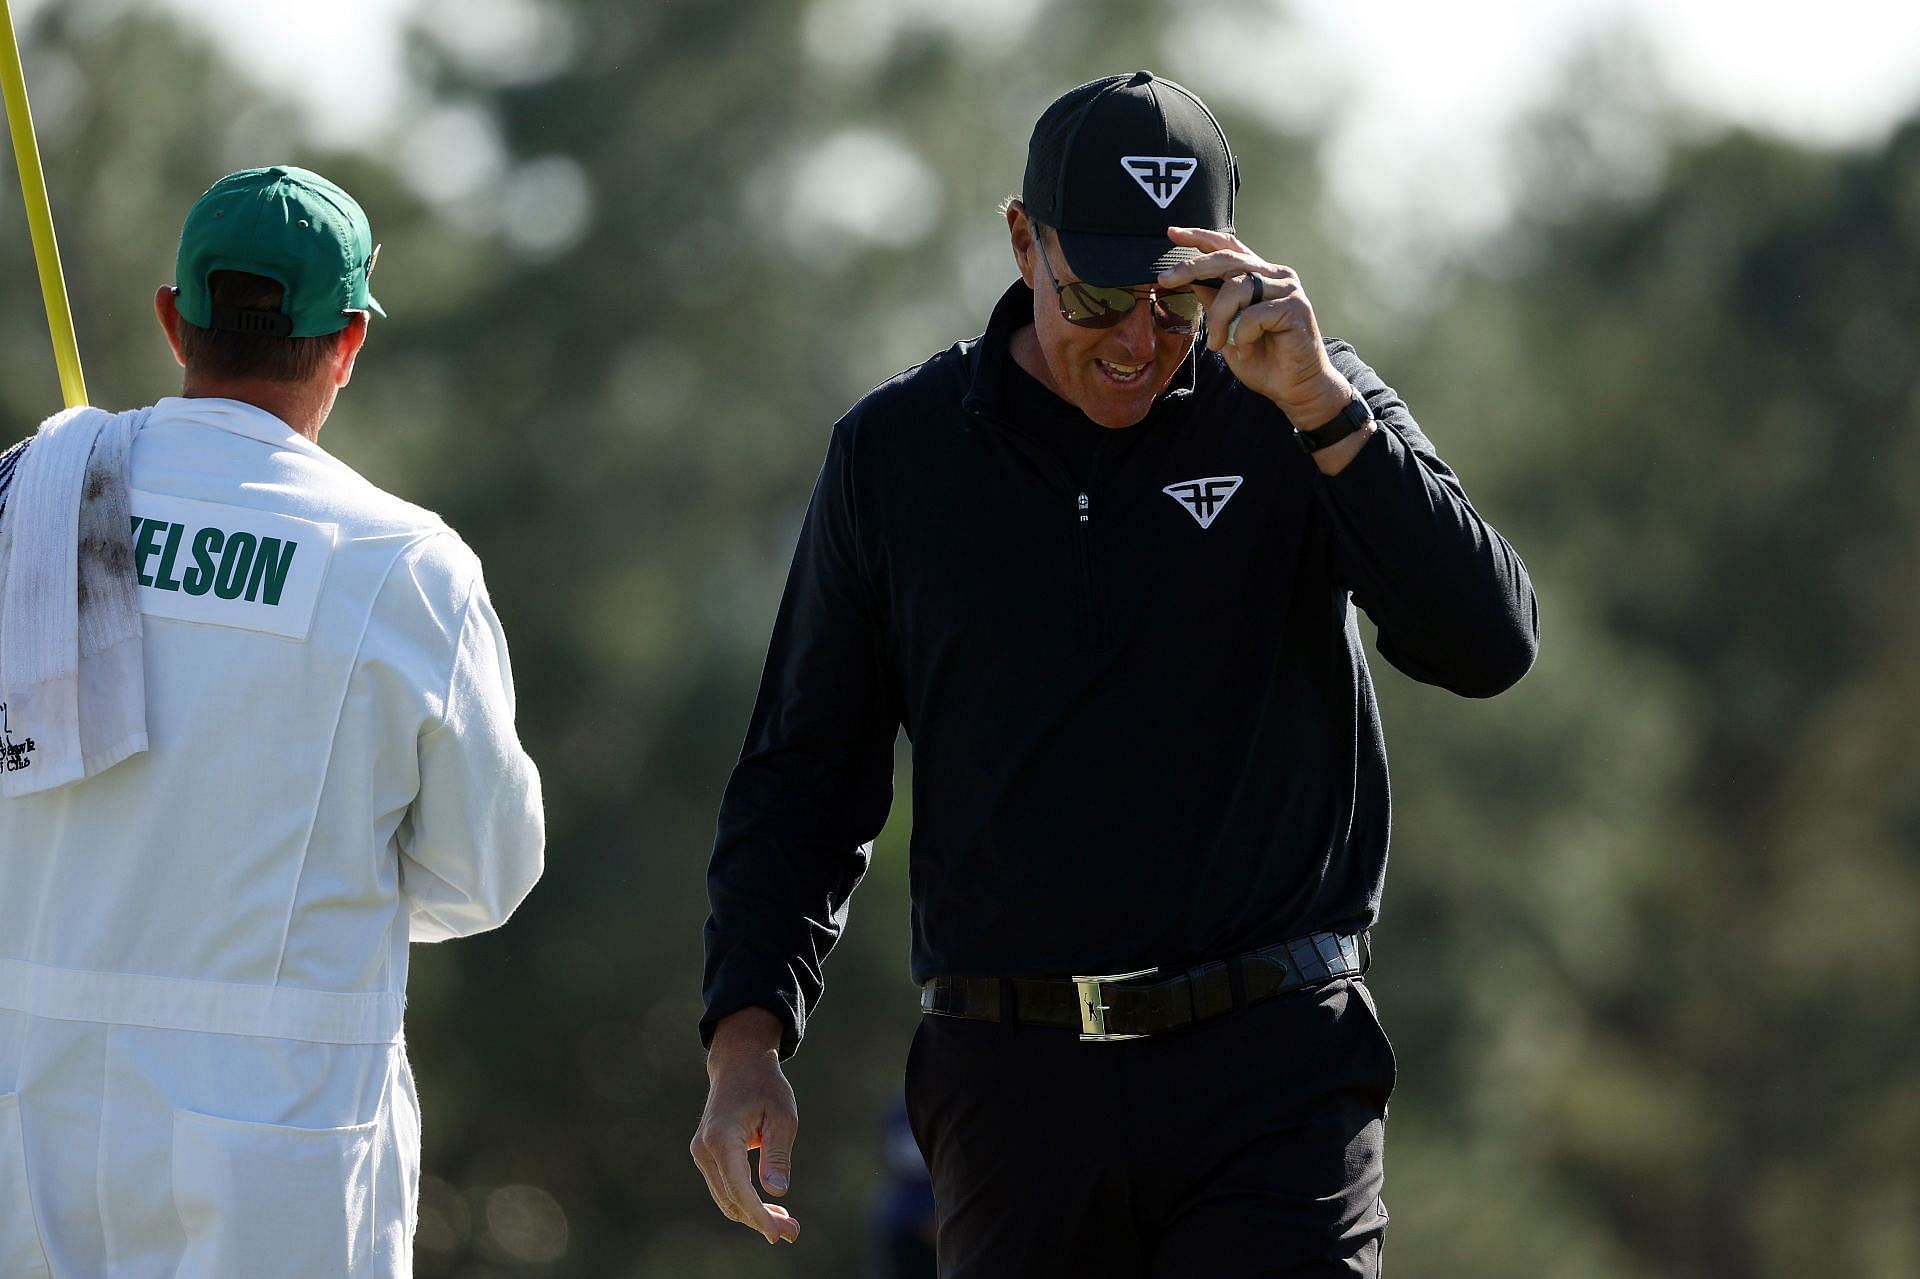 Phil Mickelson became the oldest runner-up at the 2023 Masters